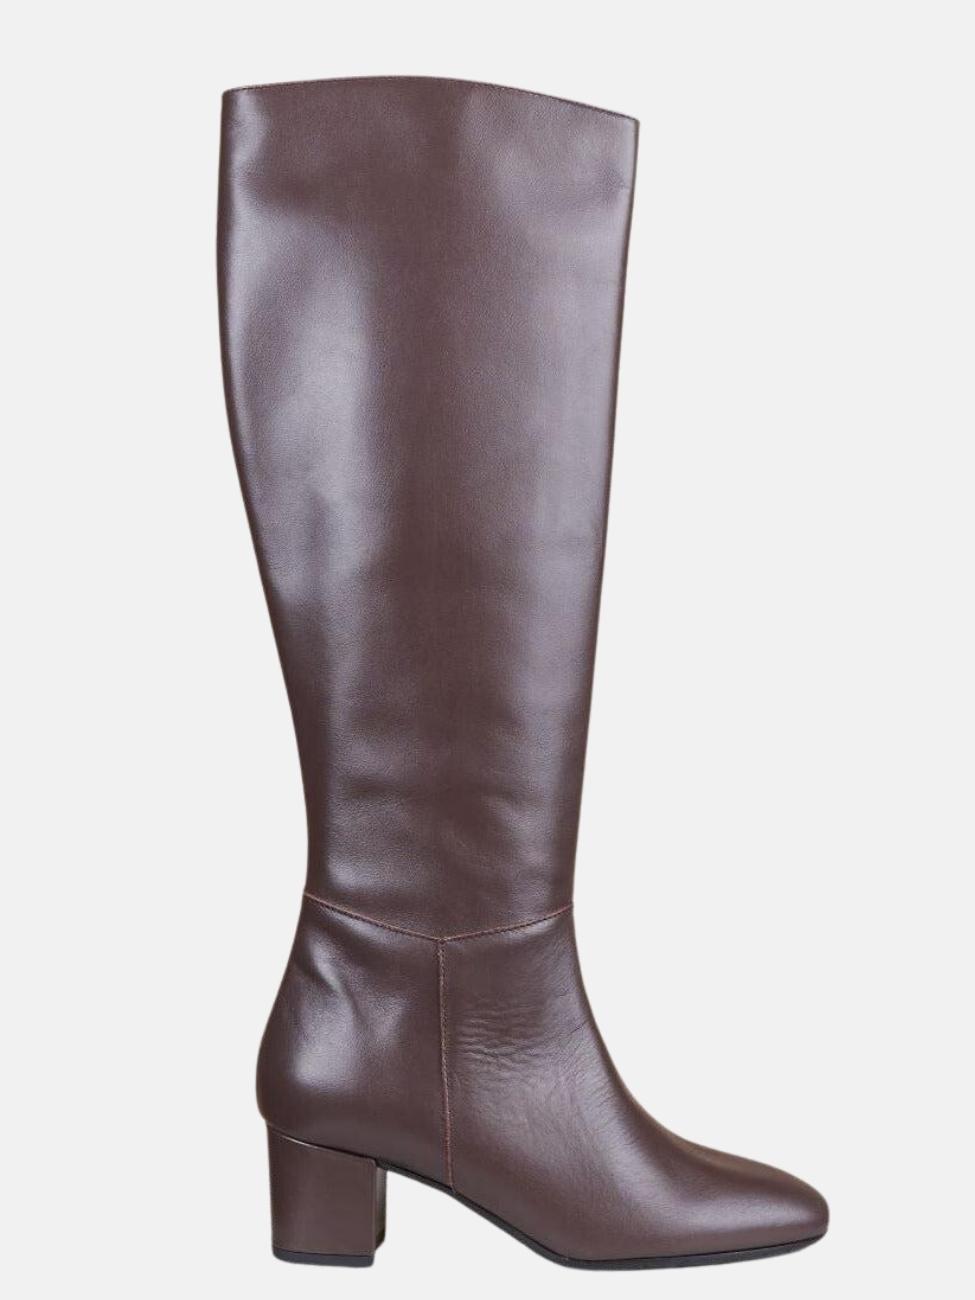 Forli Boot in Chocolate Calf Leather